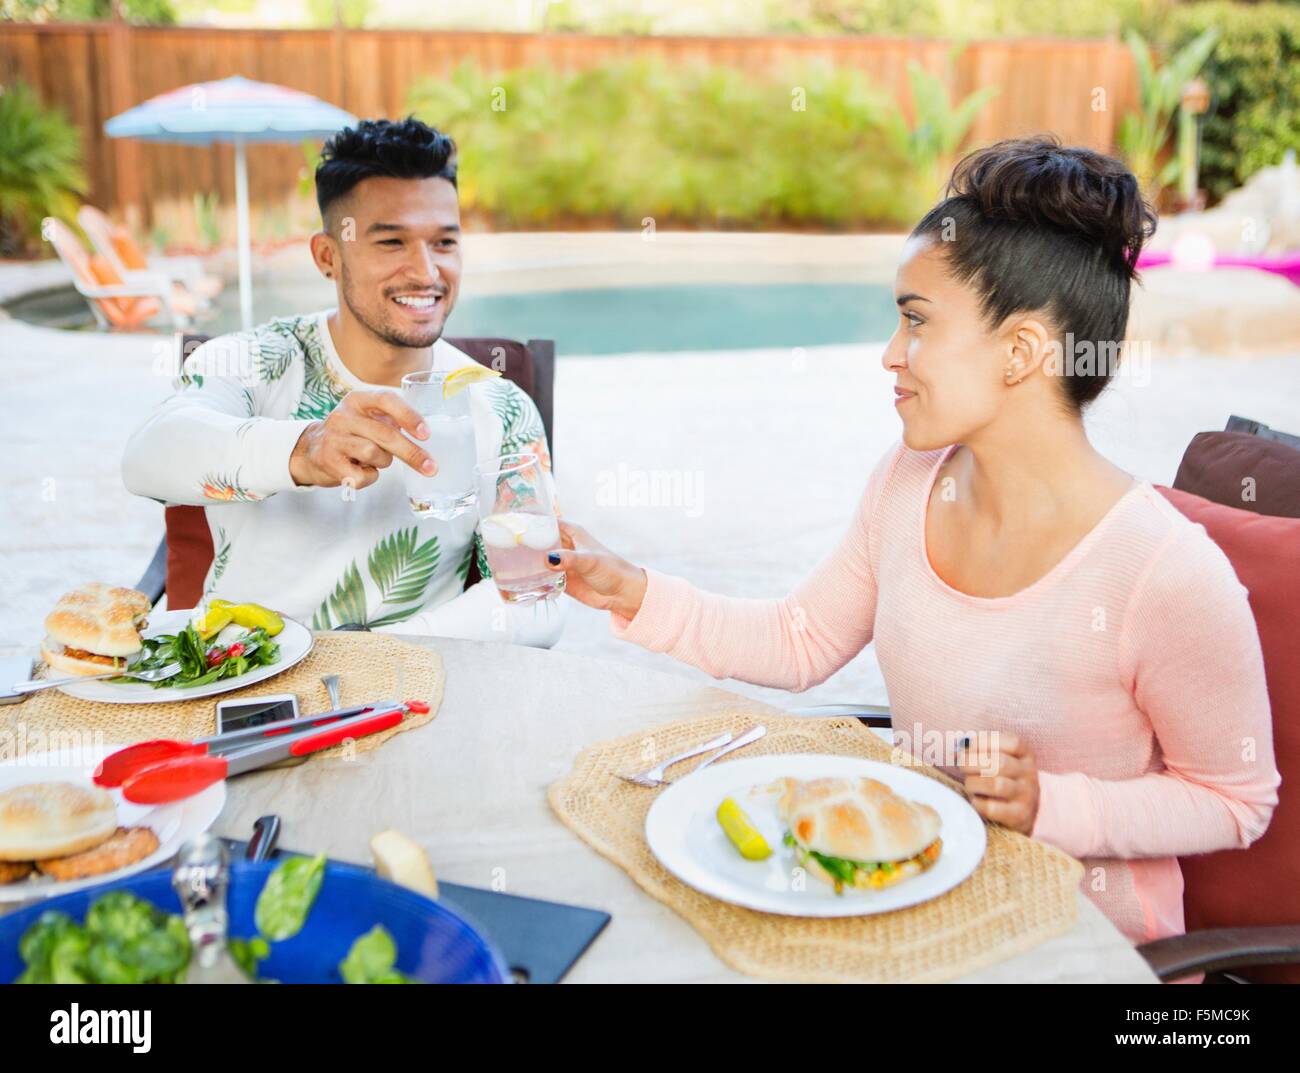 Young couple sitting down to meal outdoors making a toast Stock Photo